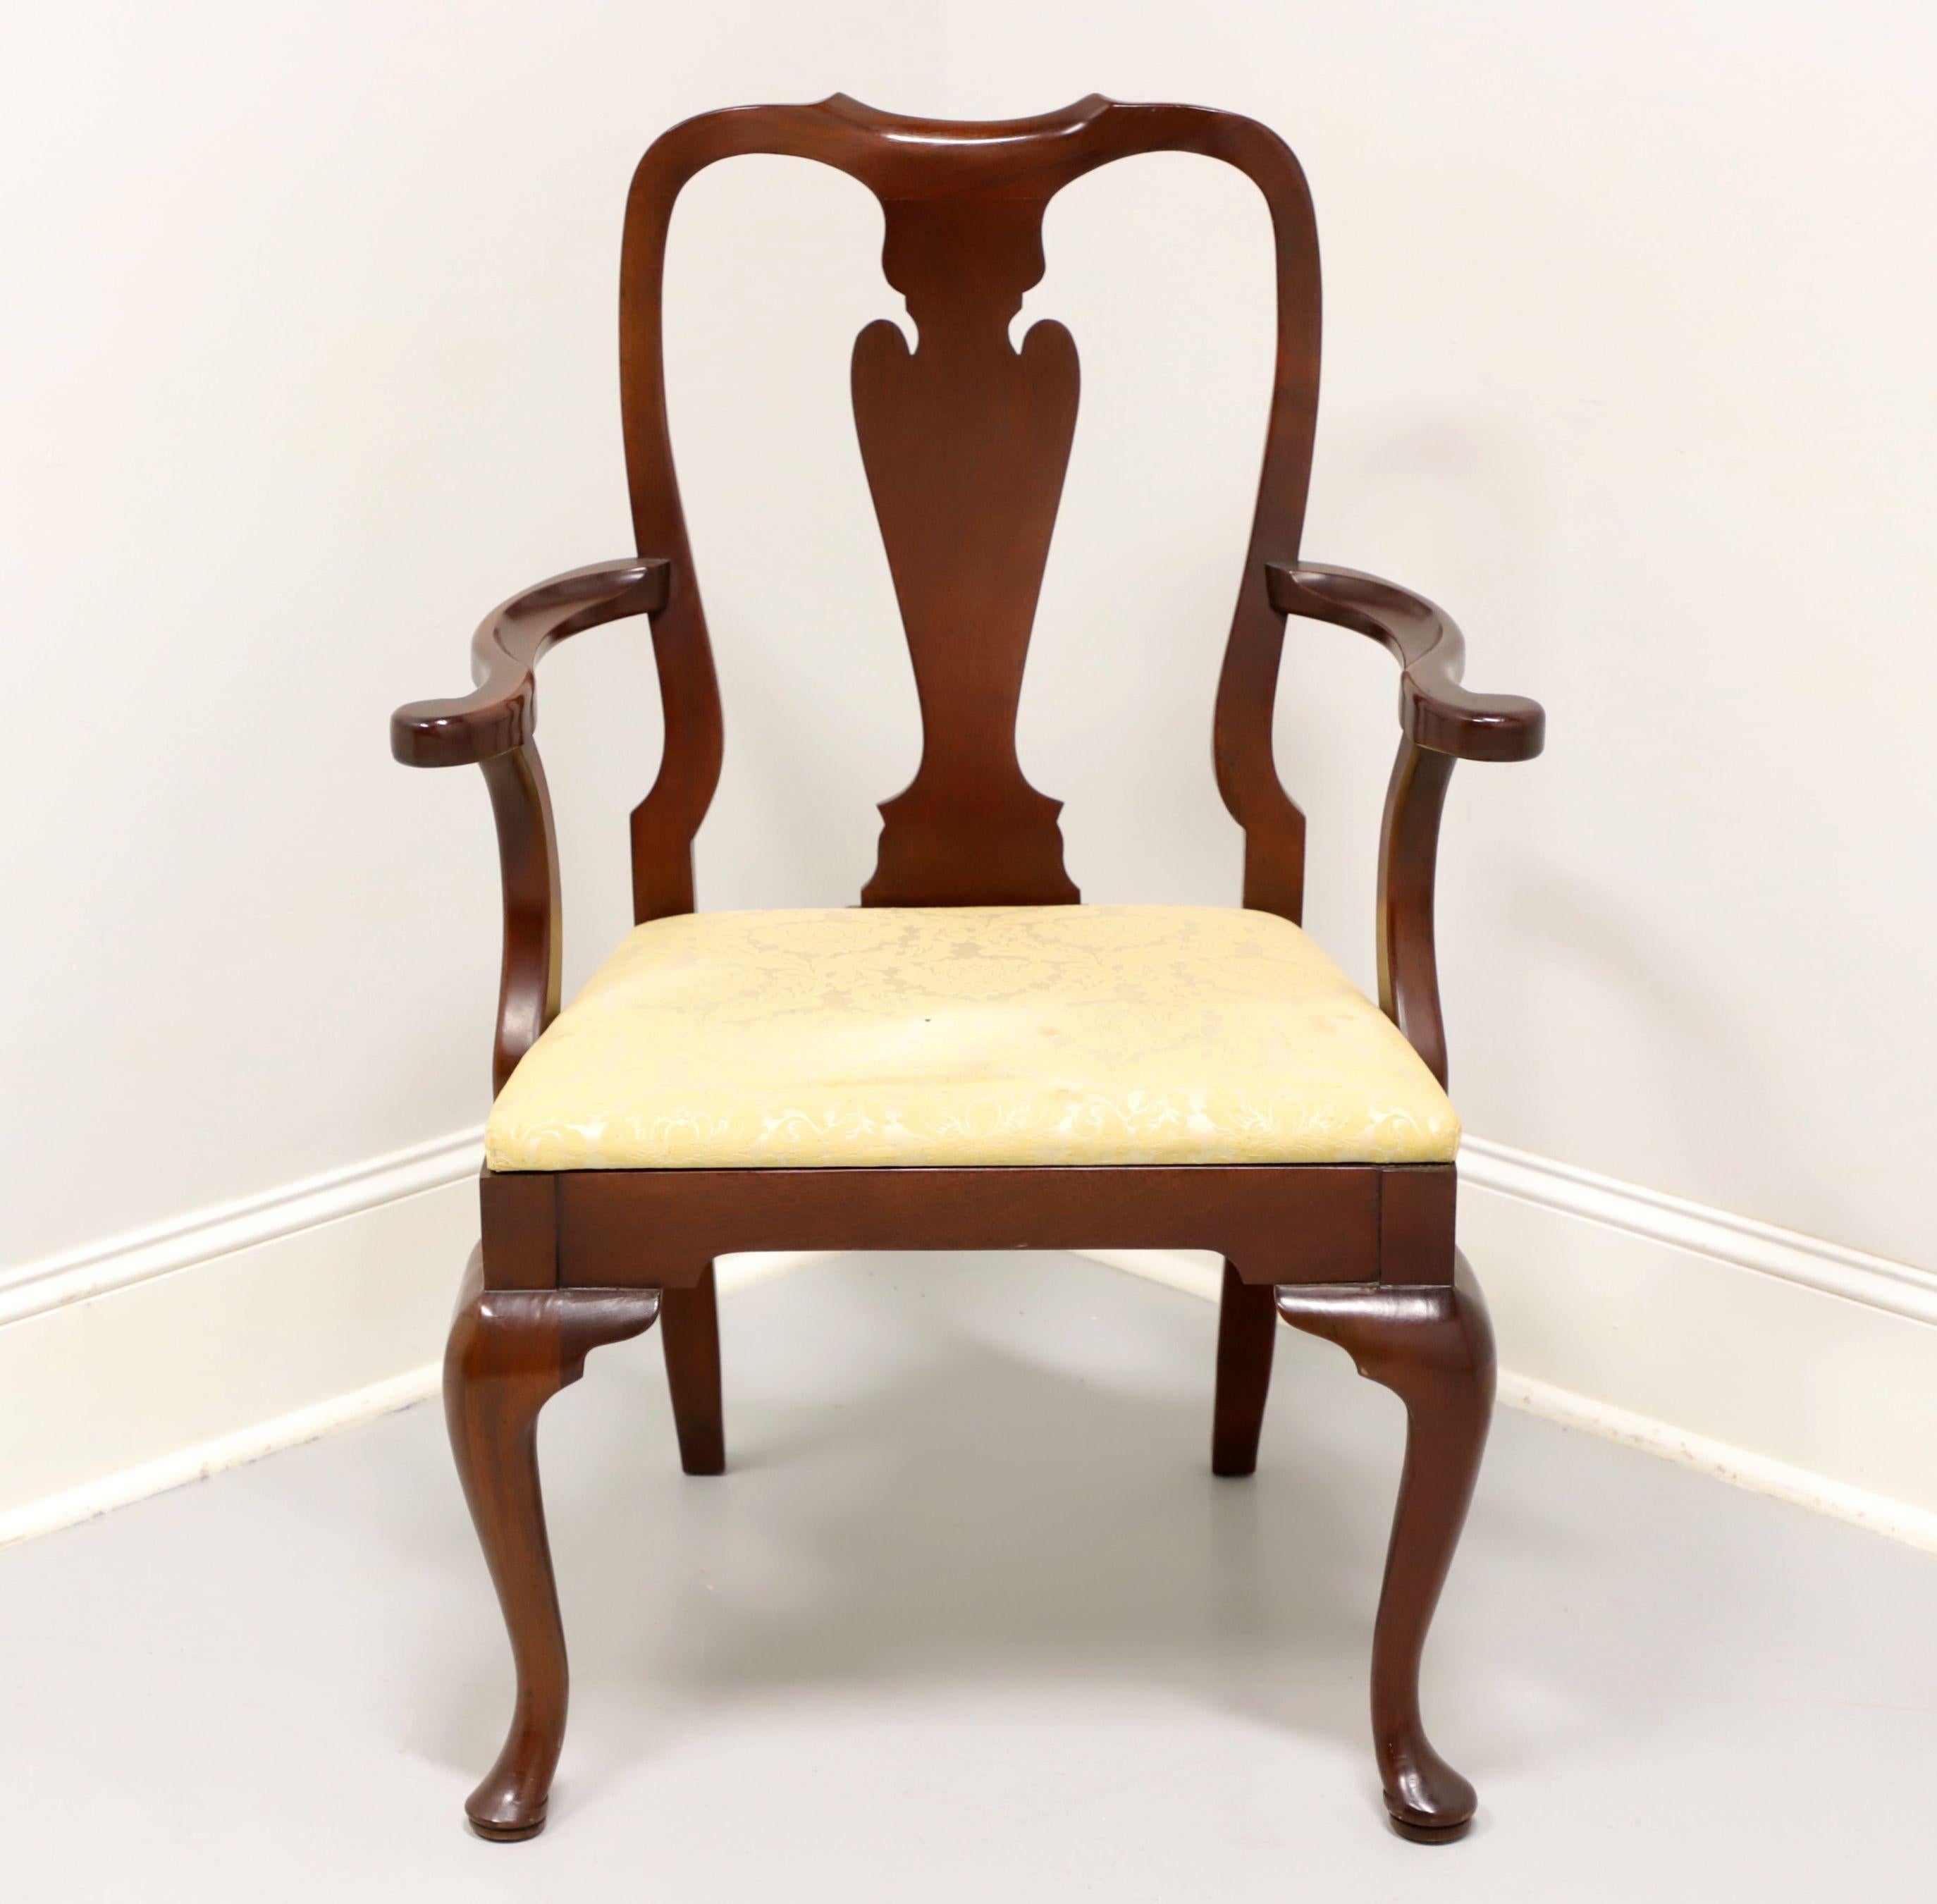 A Queen Anne style dining armchair by Hickory Chair. Mahogany with solid carved back, curved arms with arched supports, a creamy yellow fabric upholstered seat, cabriole legs and pad feet. Made in North Carolina, USA, in the late 20th